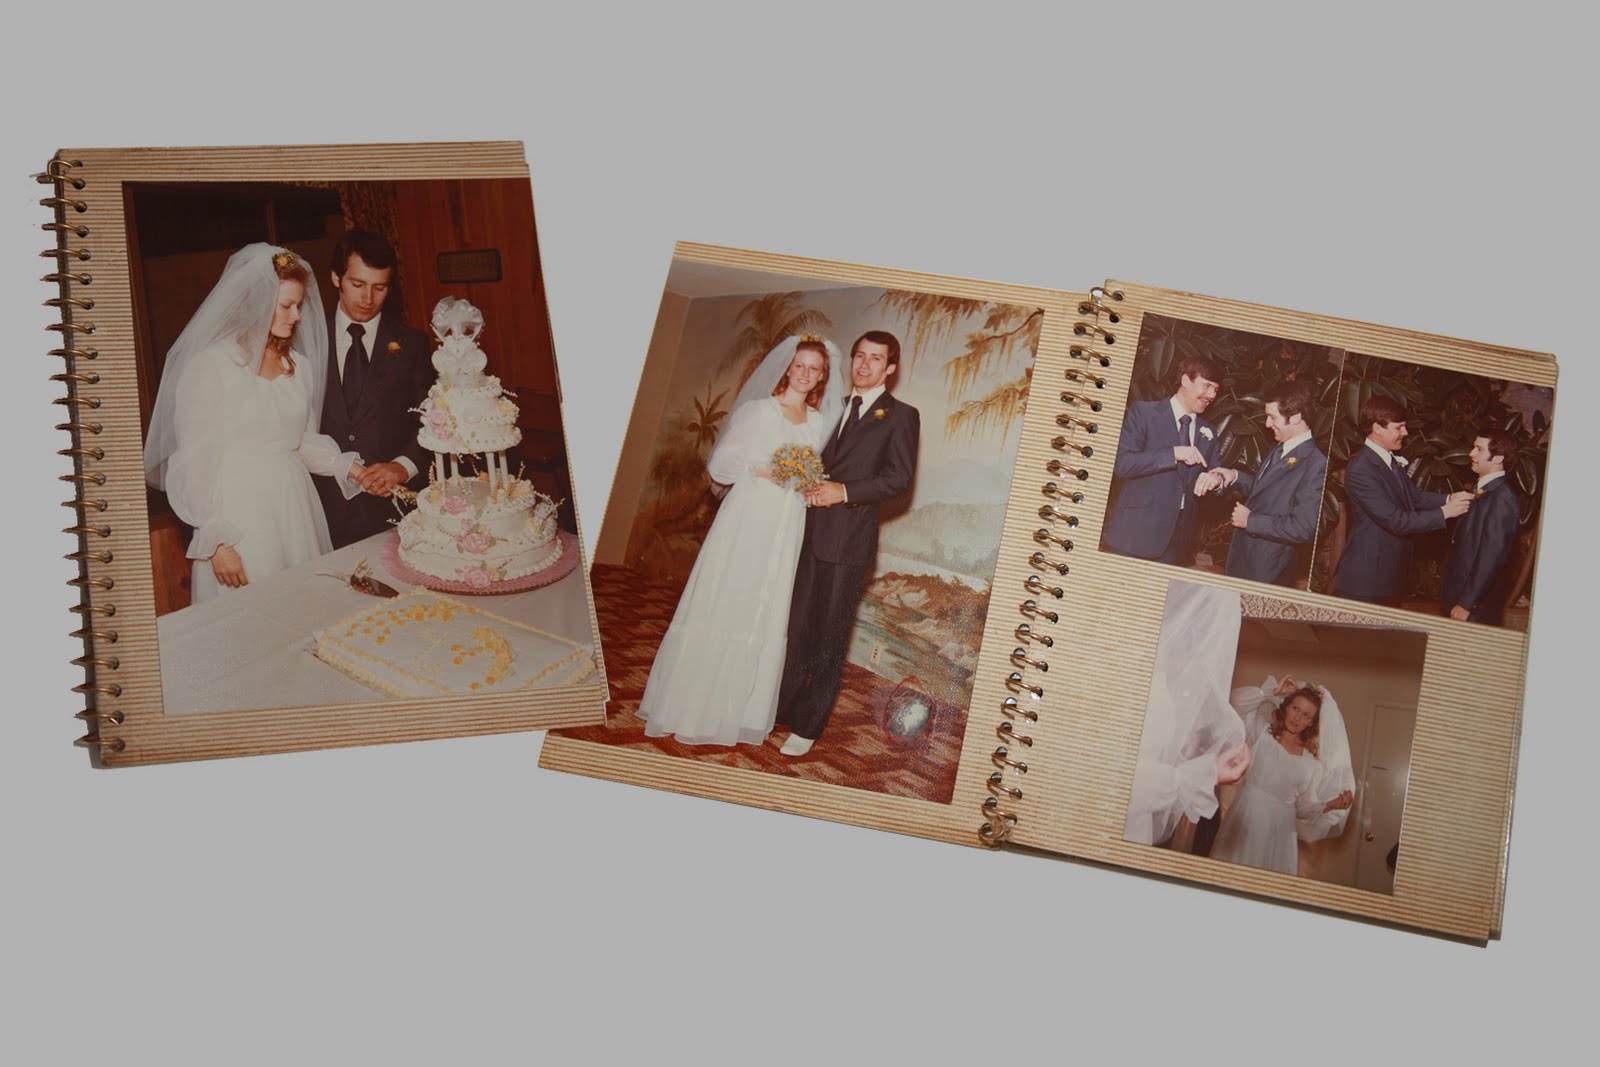 Kristi S Eye Wedding Albums Sure Have Come A Long Way Since 1977